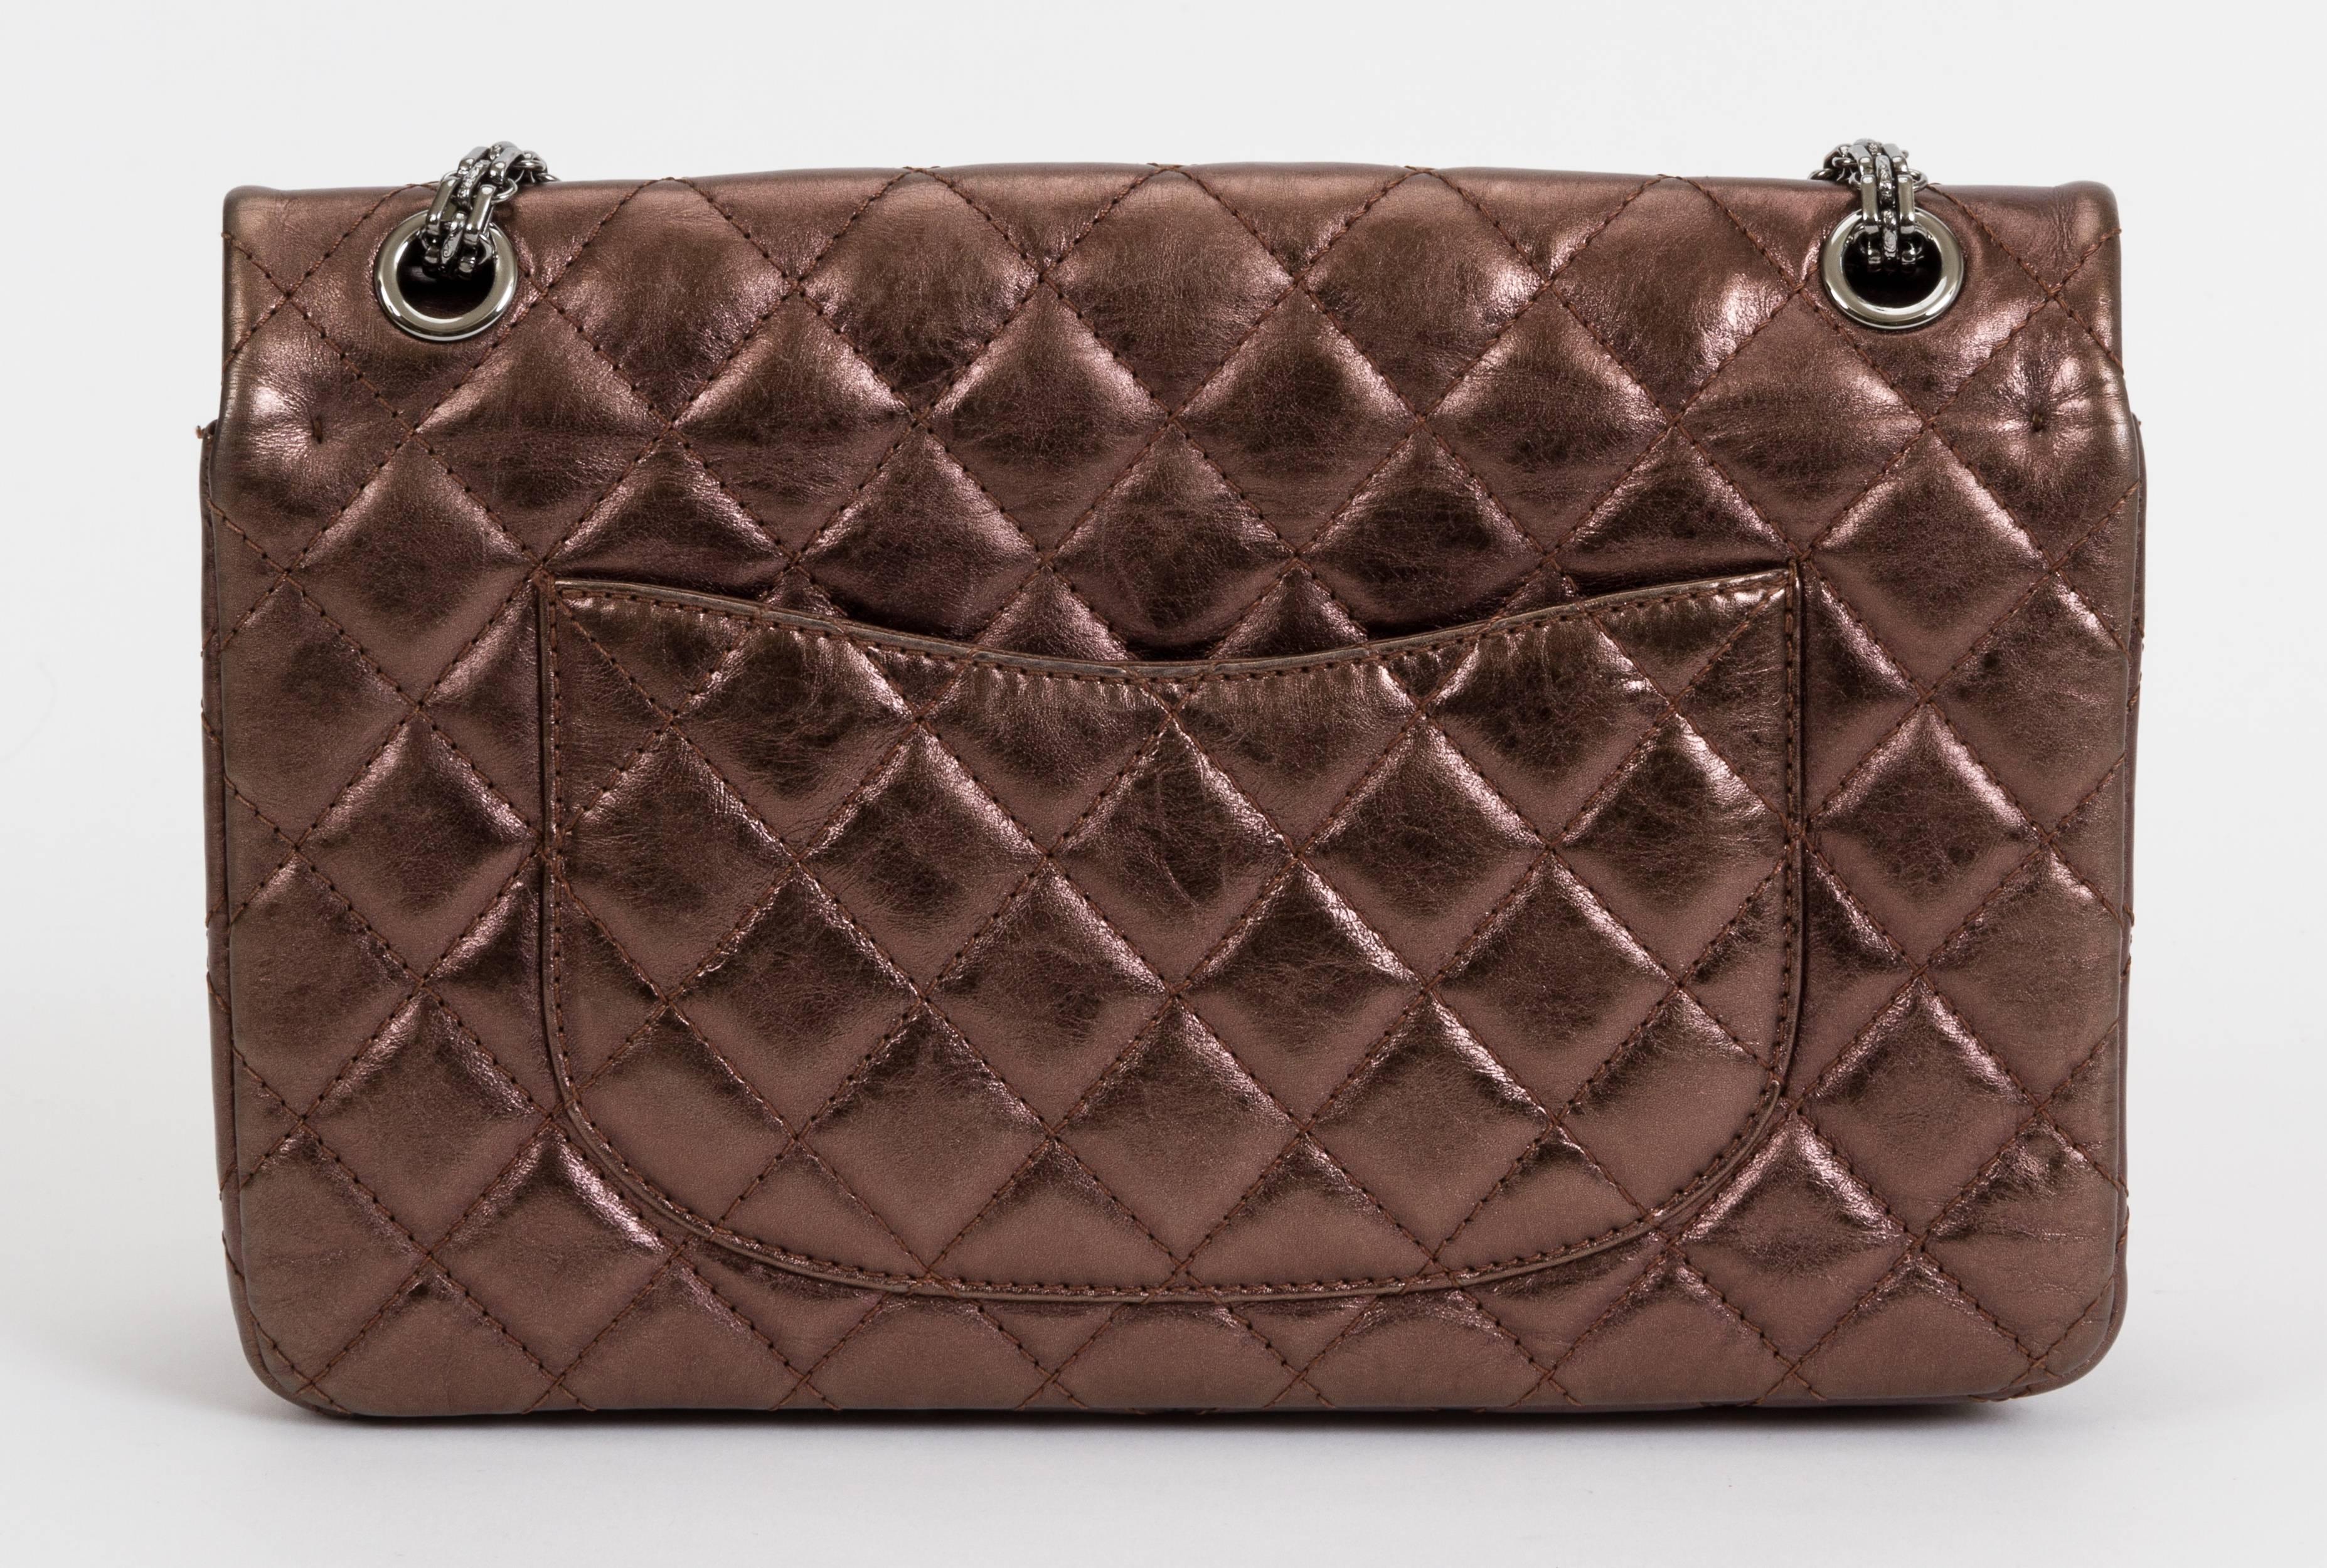 Chanel reissue jumbo double-flap bag in metallic bronze quilted leather with gunmetal hardware. Shoulder drop, 11